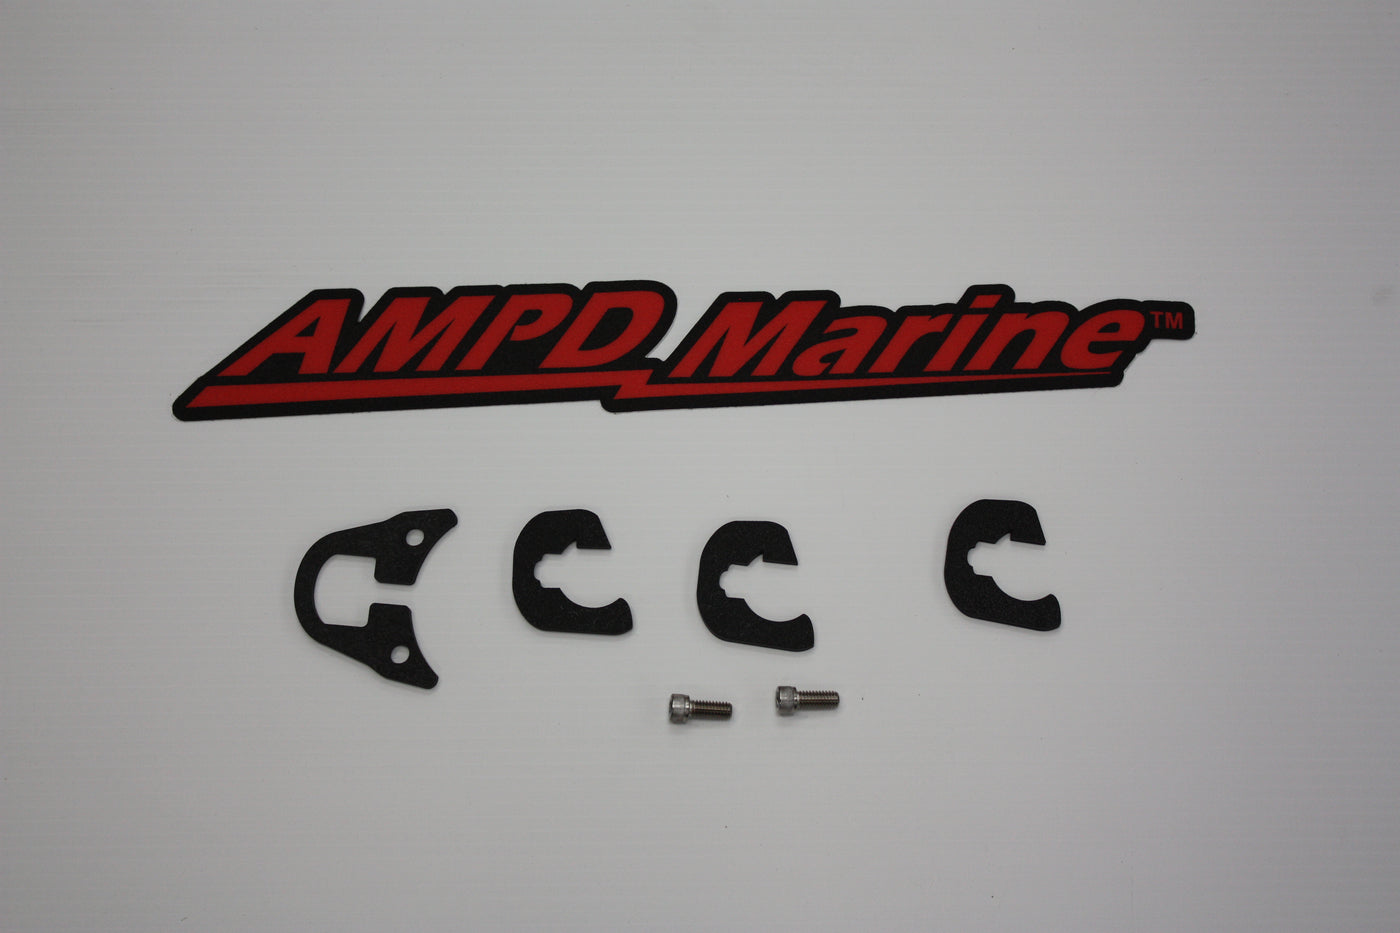 NPDULTREXCMS AMPD MARINE ULTREX CABLE MANAGEMENT SYSTEM LIVESCOPE/ACTIVE TARGET